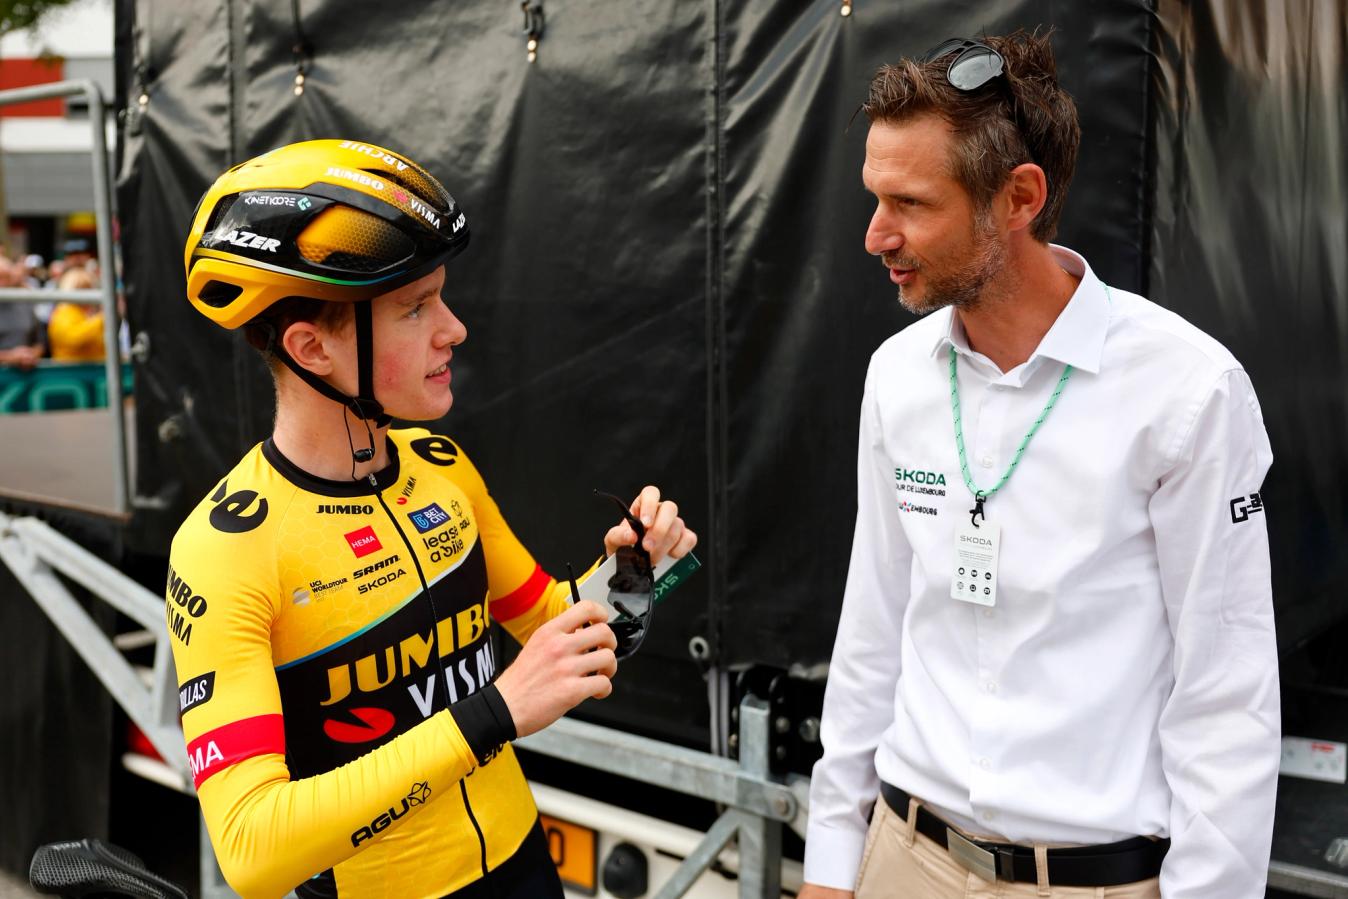 Ryan is always keen to learn from those who have proven themselves at the highest level, whether it be Andy Schleck (right) or his new teammates